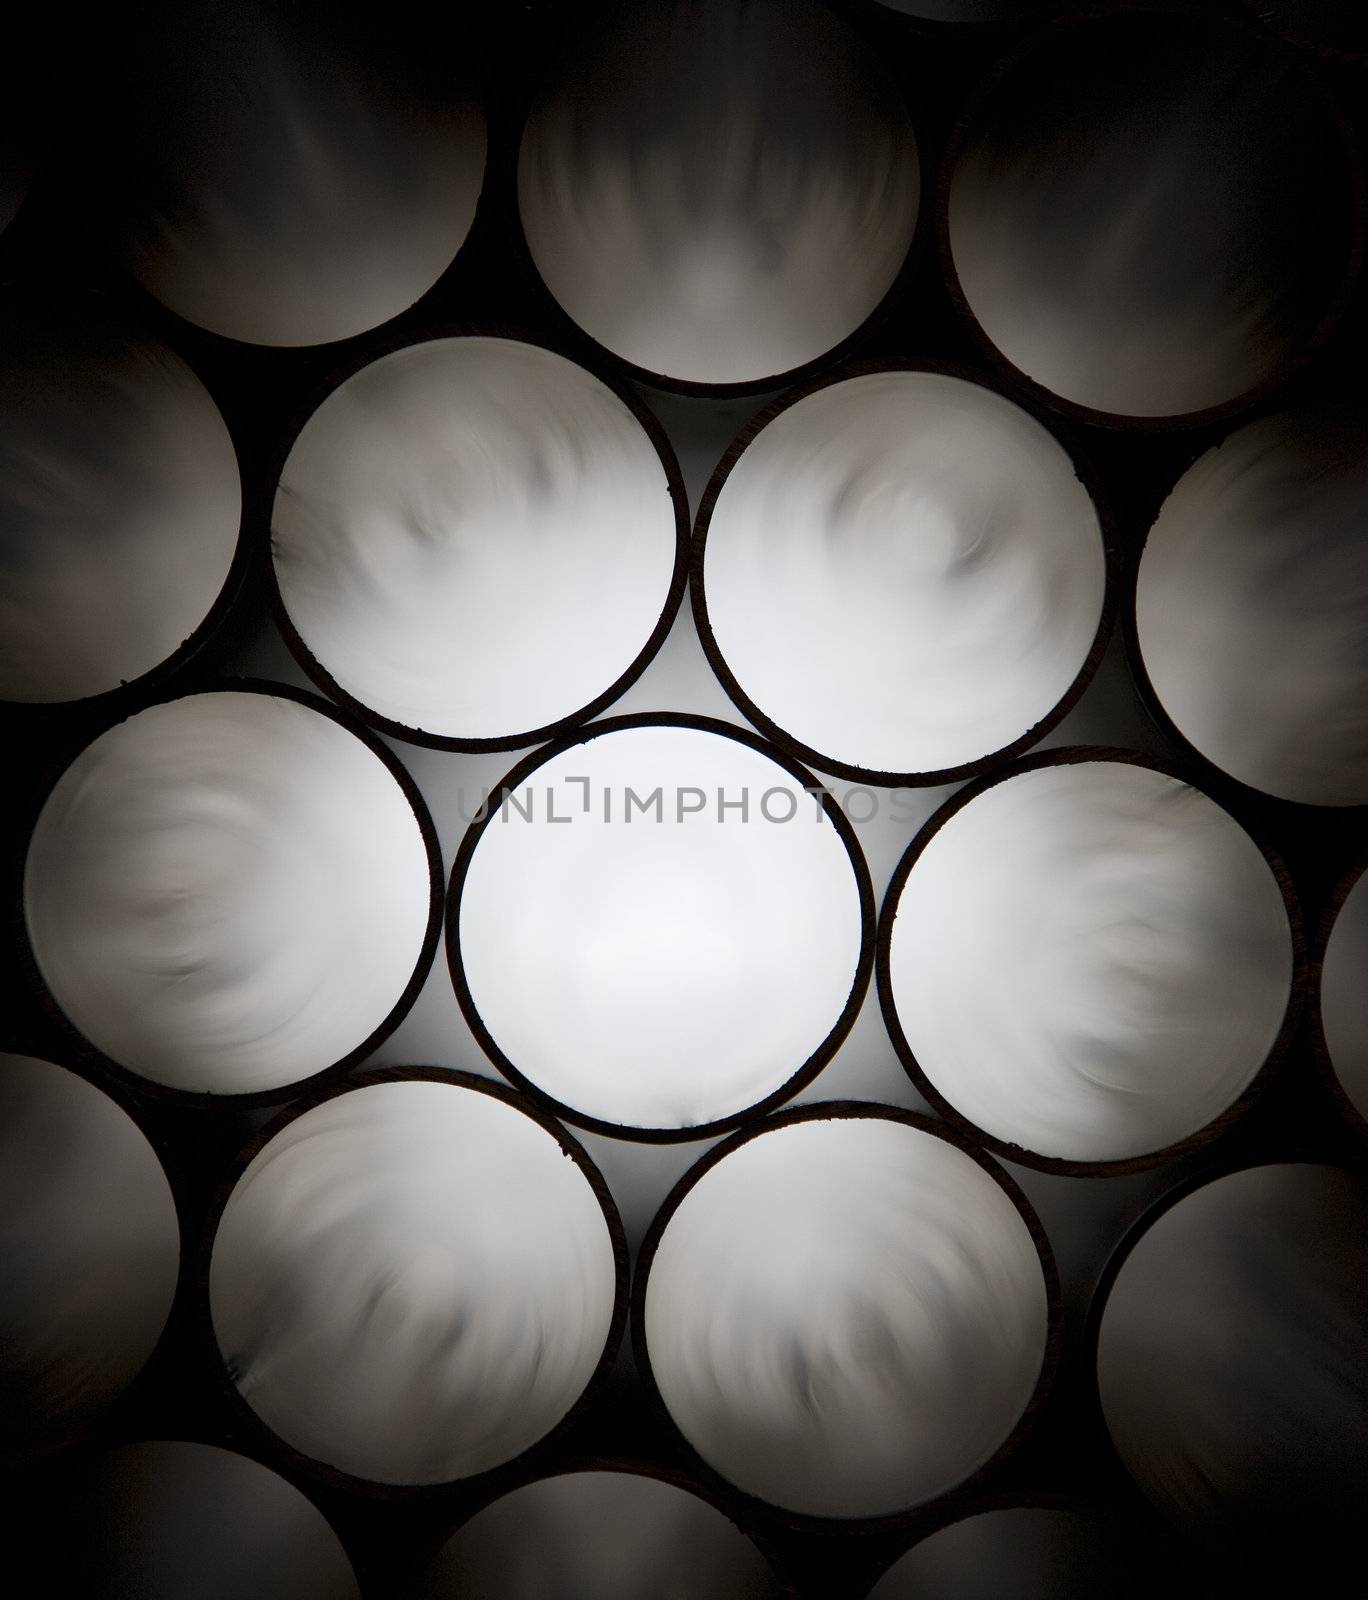 Industrial pipes as a pattern